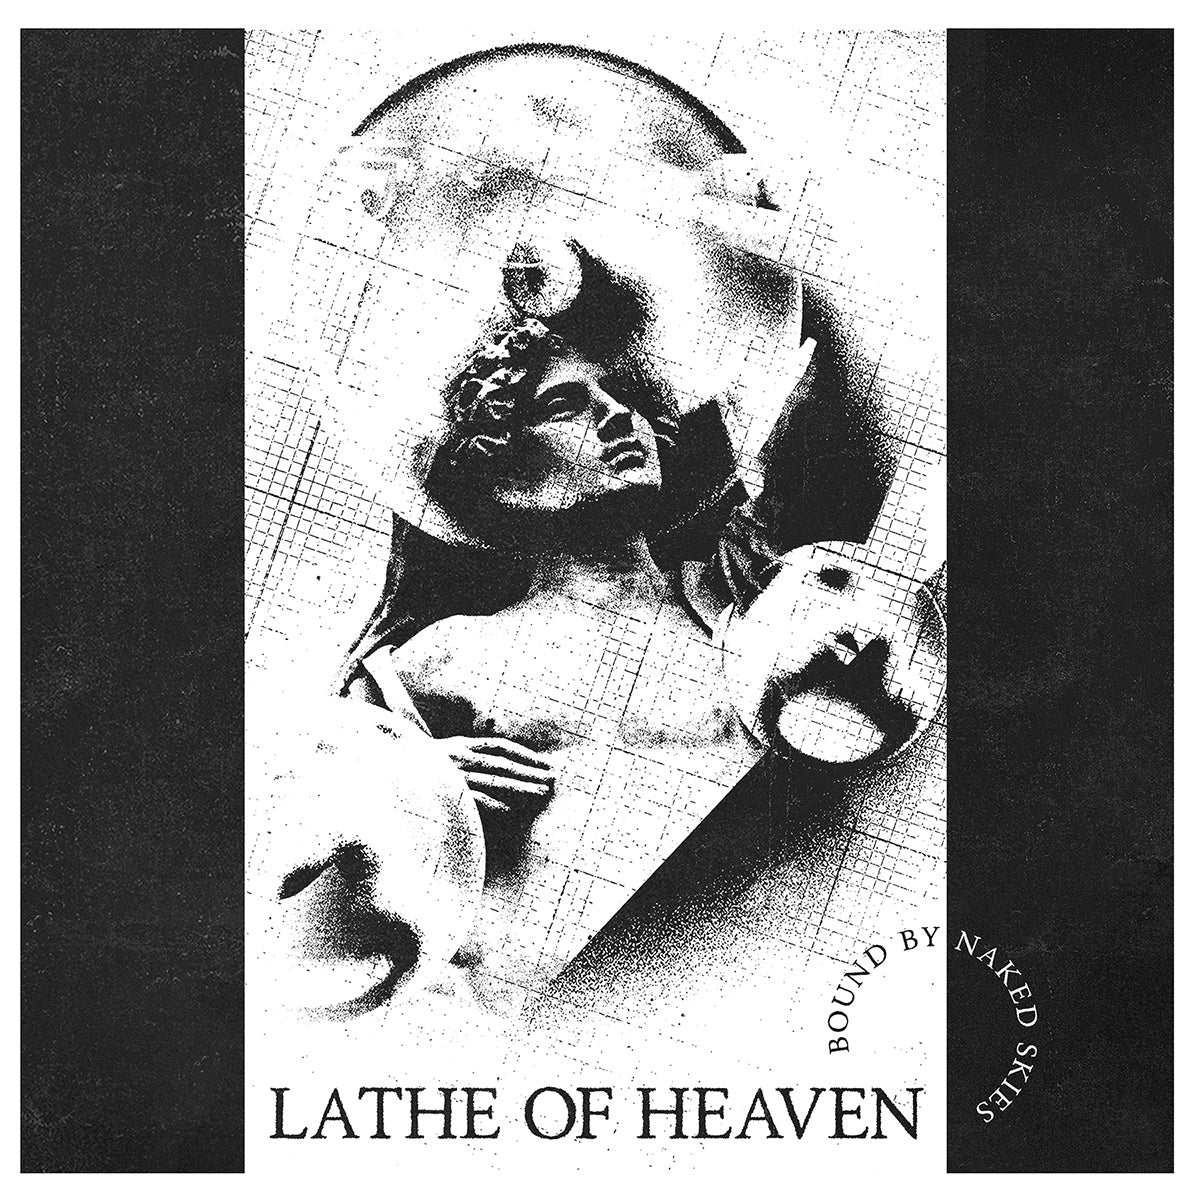 LATHE OF HEAVEN 'BOUND BY NAKED SKIES'